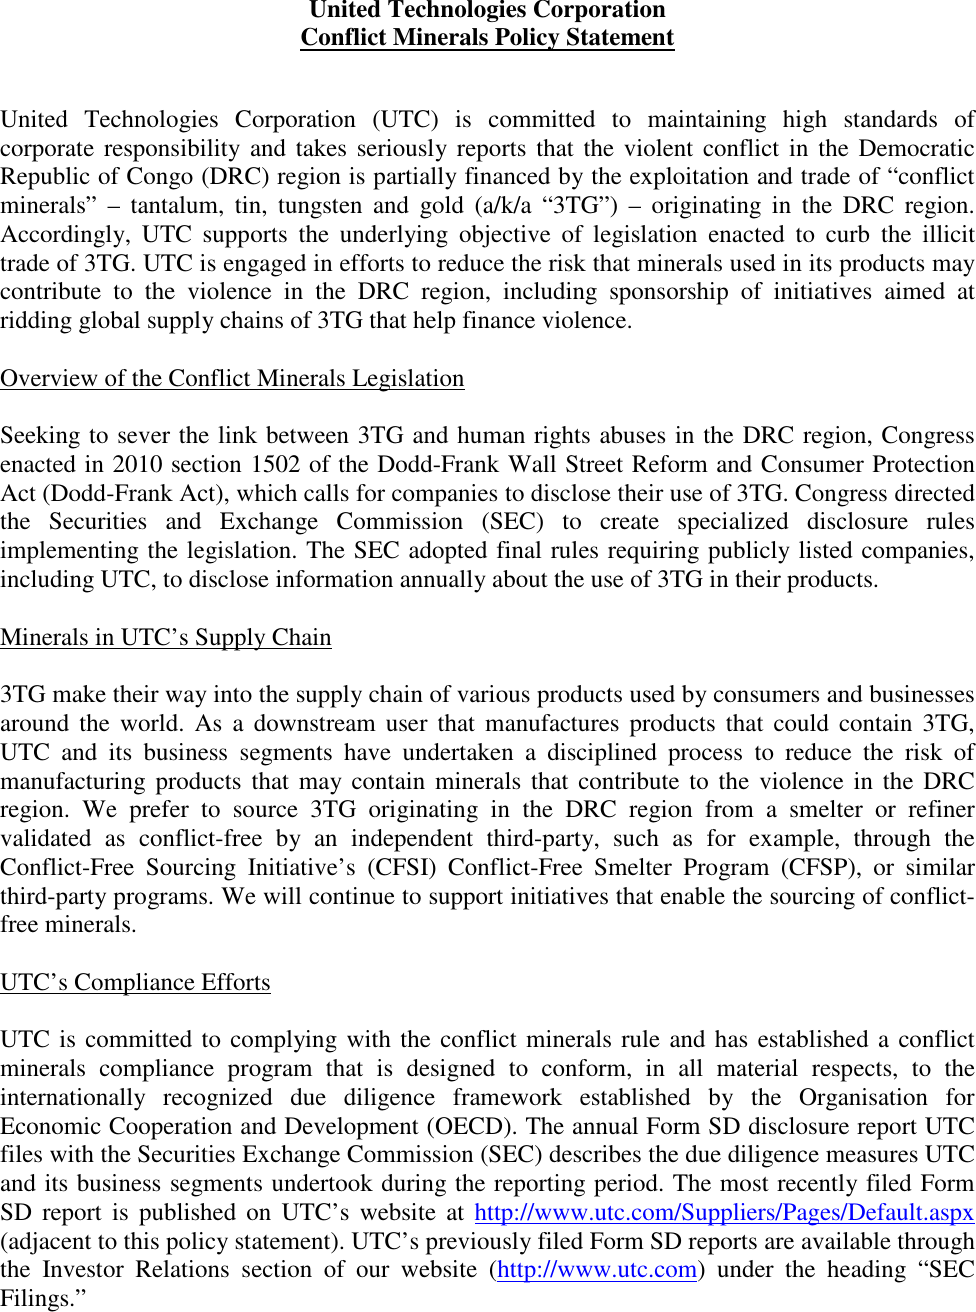 Page 1 of 2 - UTCLEG1-#137814-v19-Conflict_Minerals_-_UTC_Policy_Statement More Conflict Minerals Policy